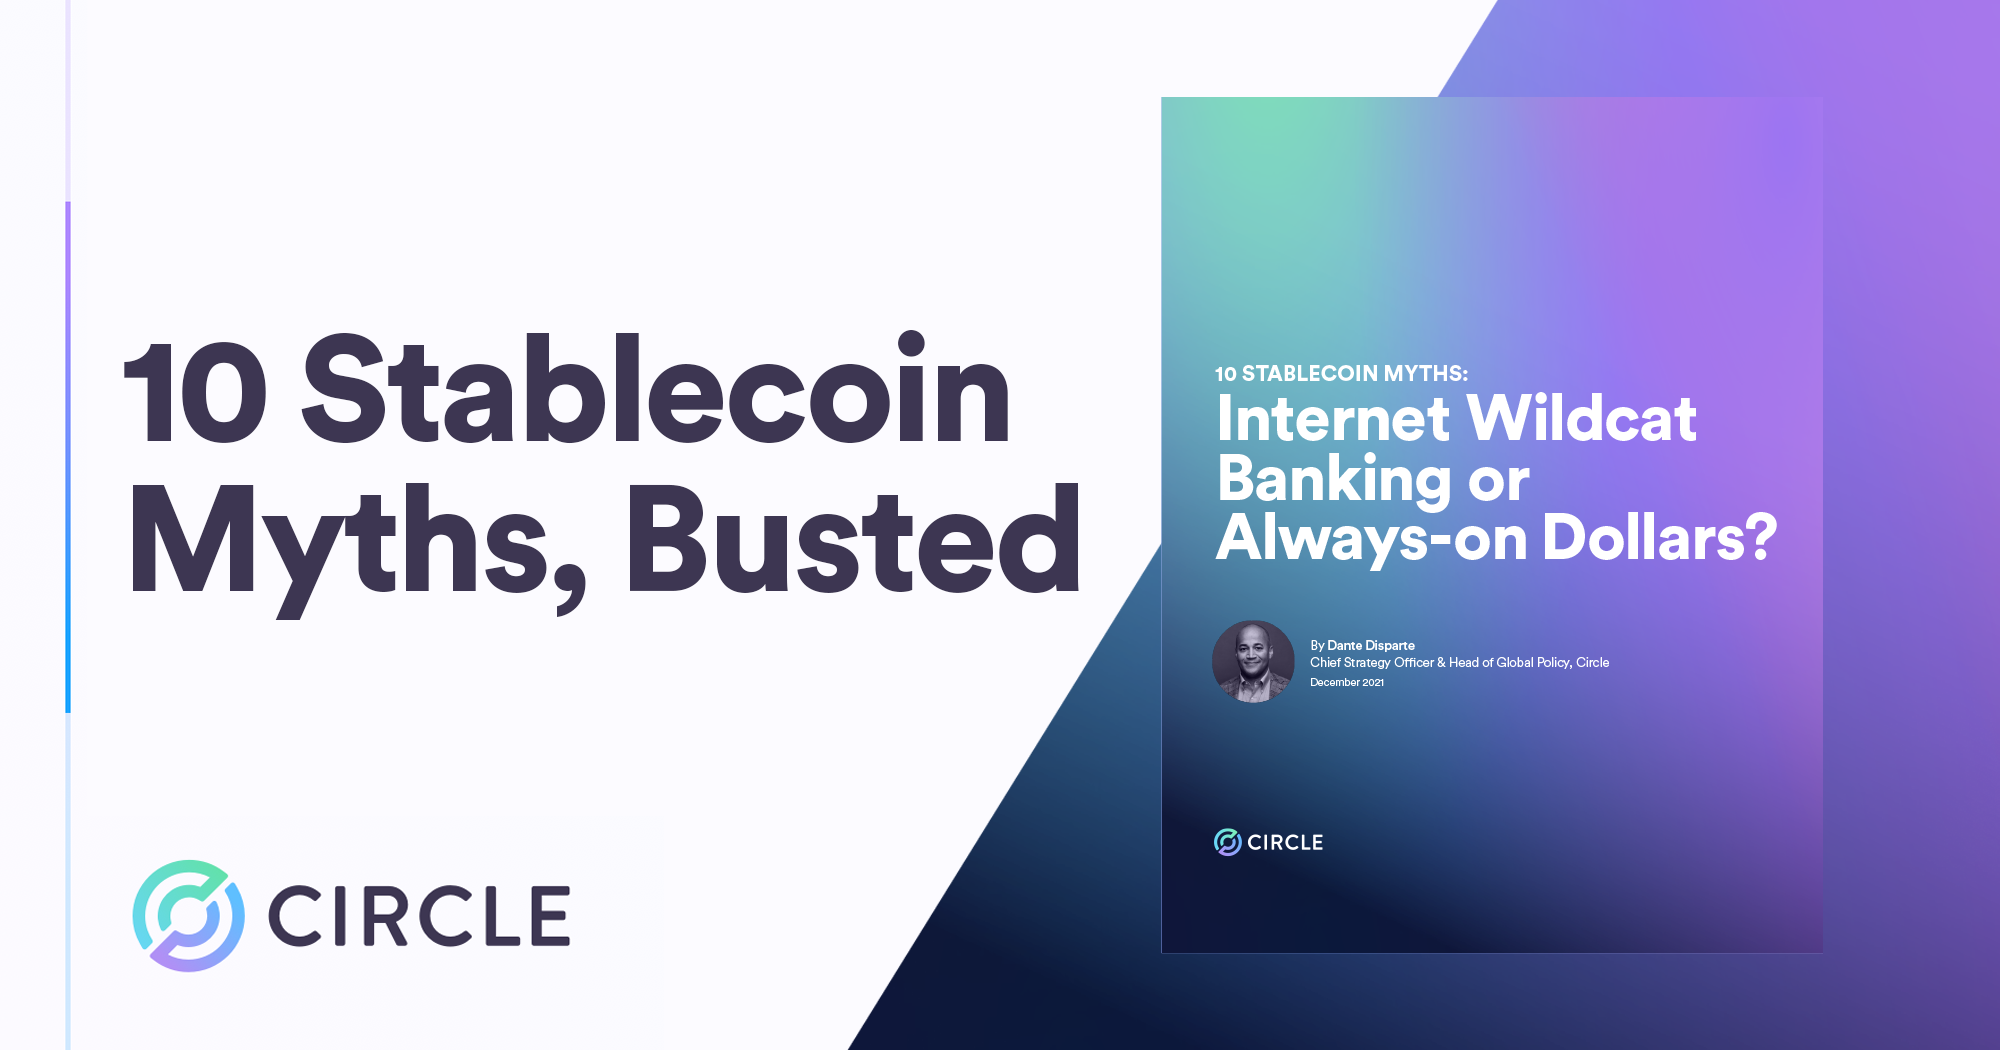 10 Stablecoin Myths: Internet Wildcat Banking or Always-on Dollars?